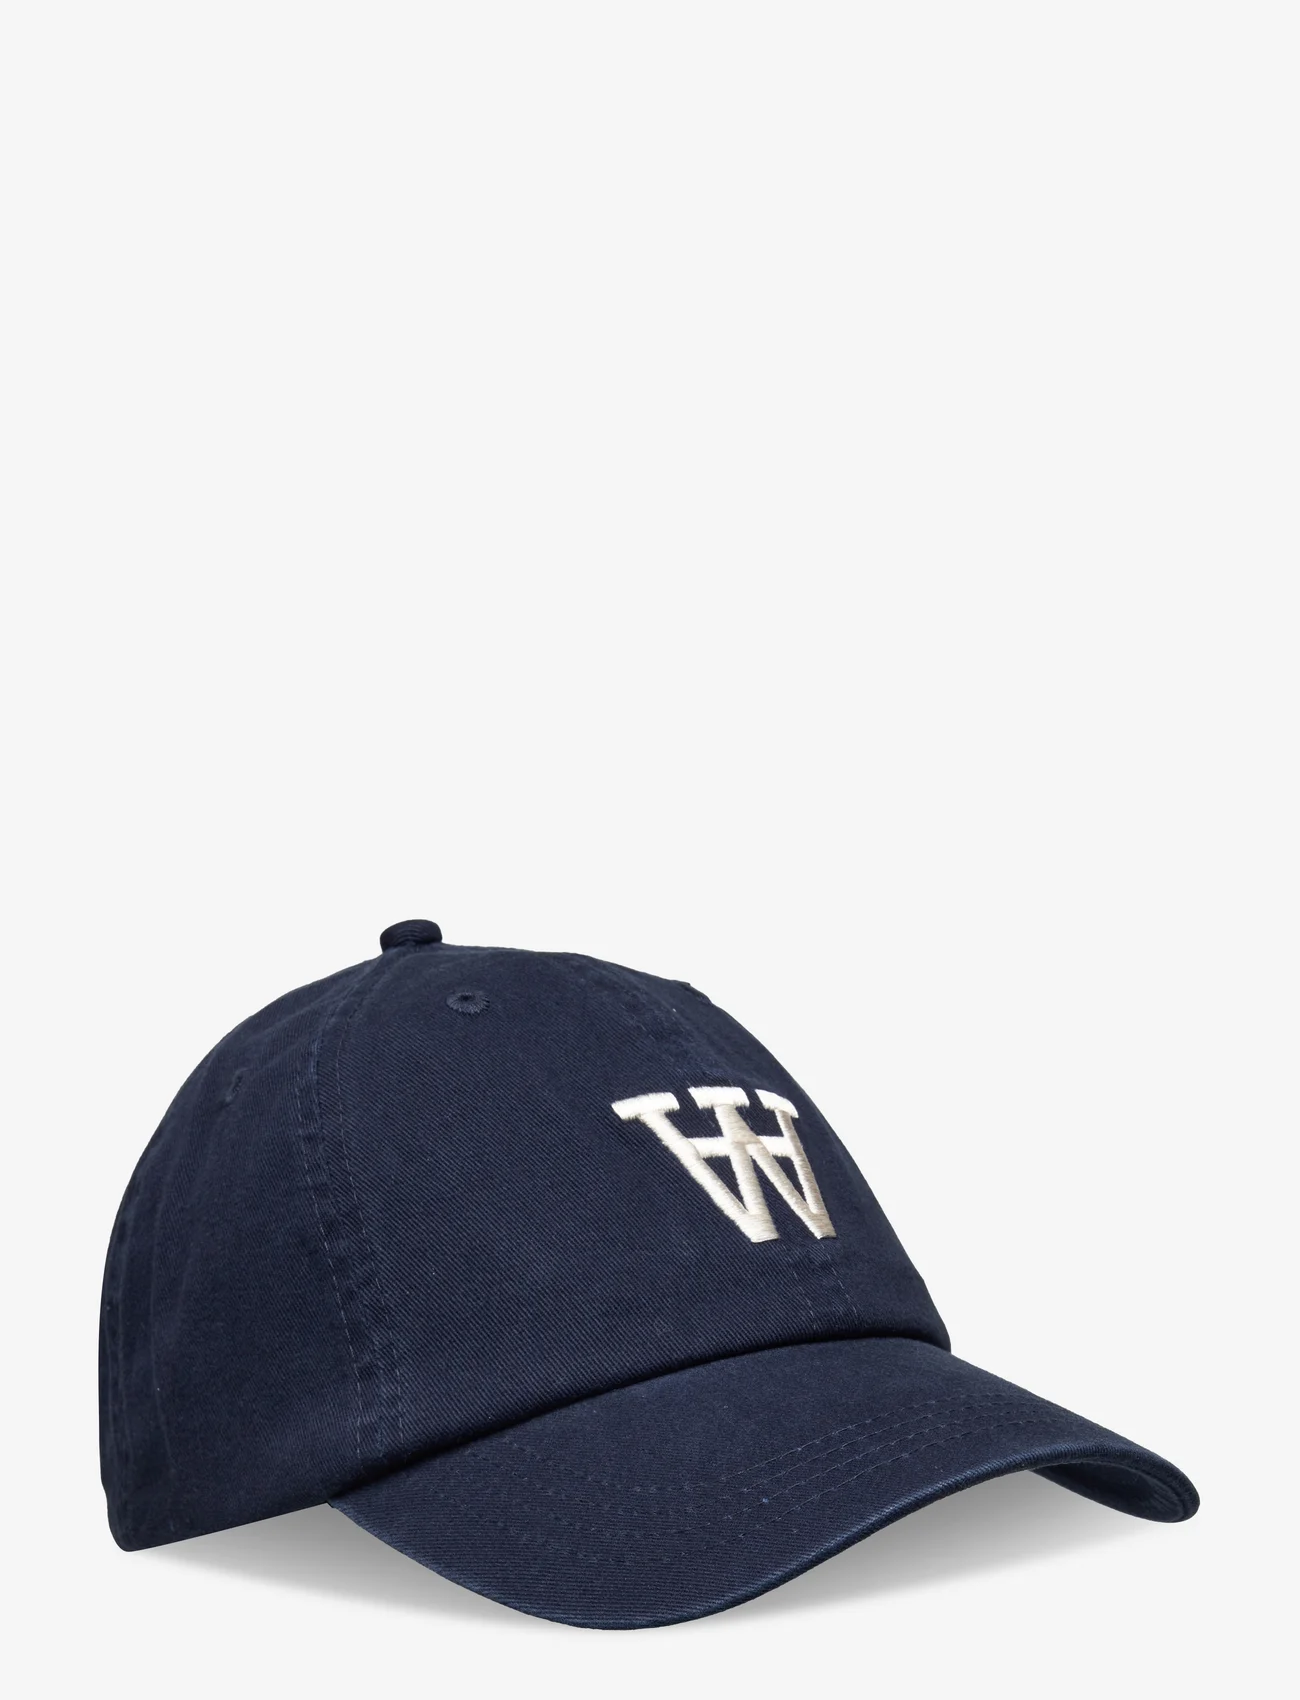 Double A by Wood Wood - Eli embroidery cap - caps - navy - 0